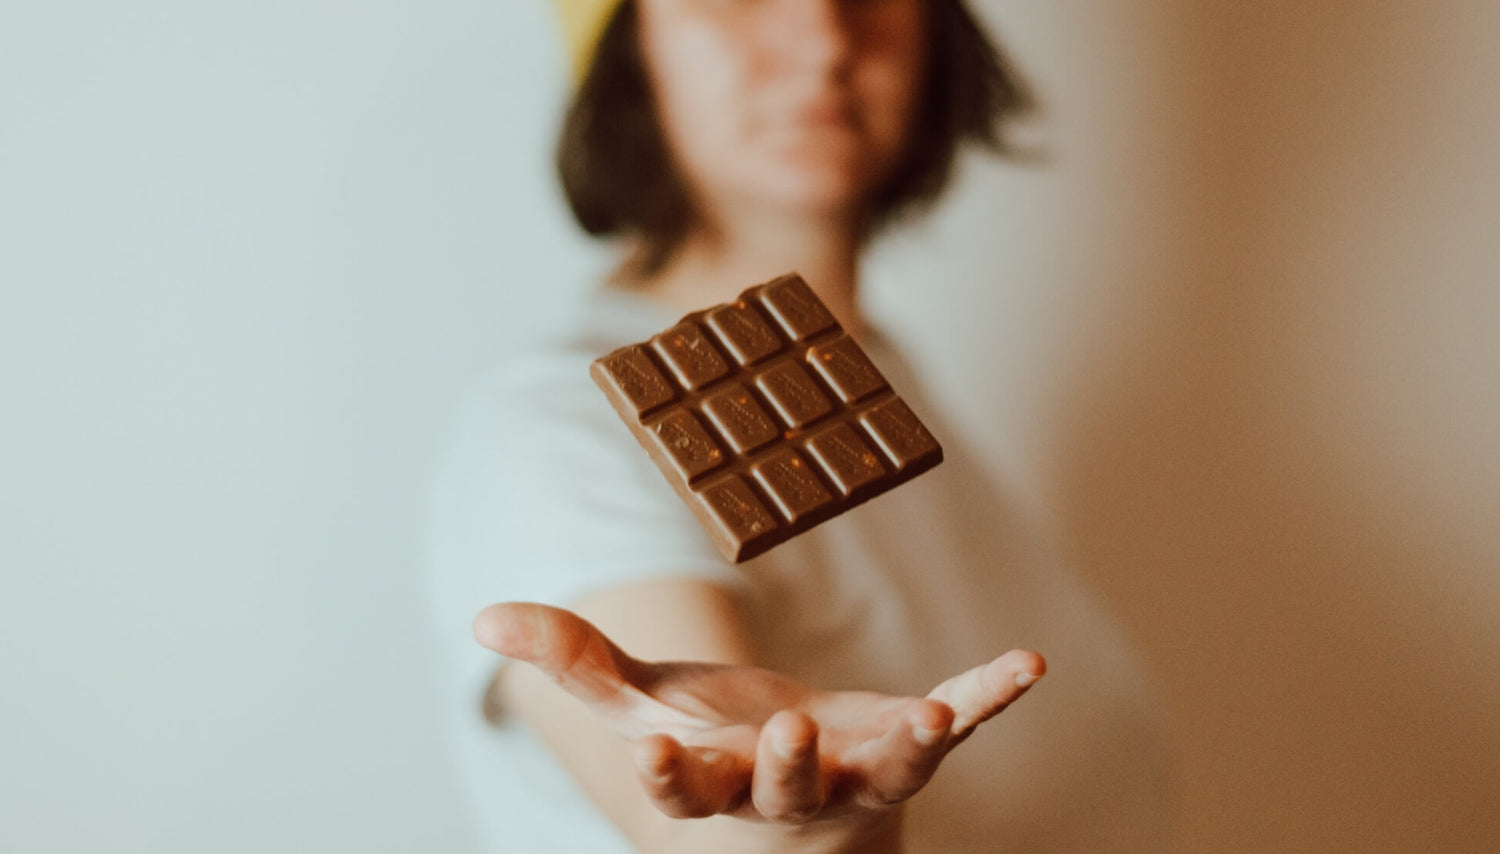 Close up of person catching bar of chocolate in hand